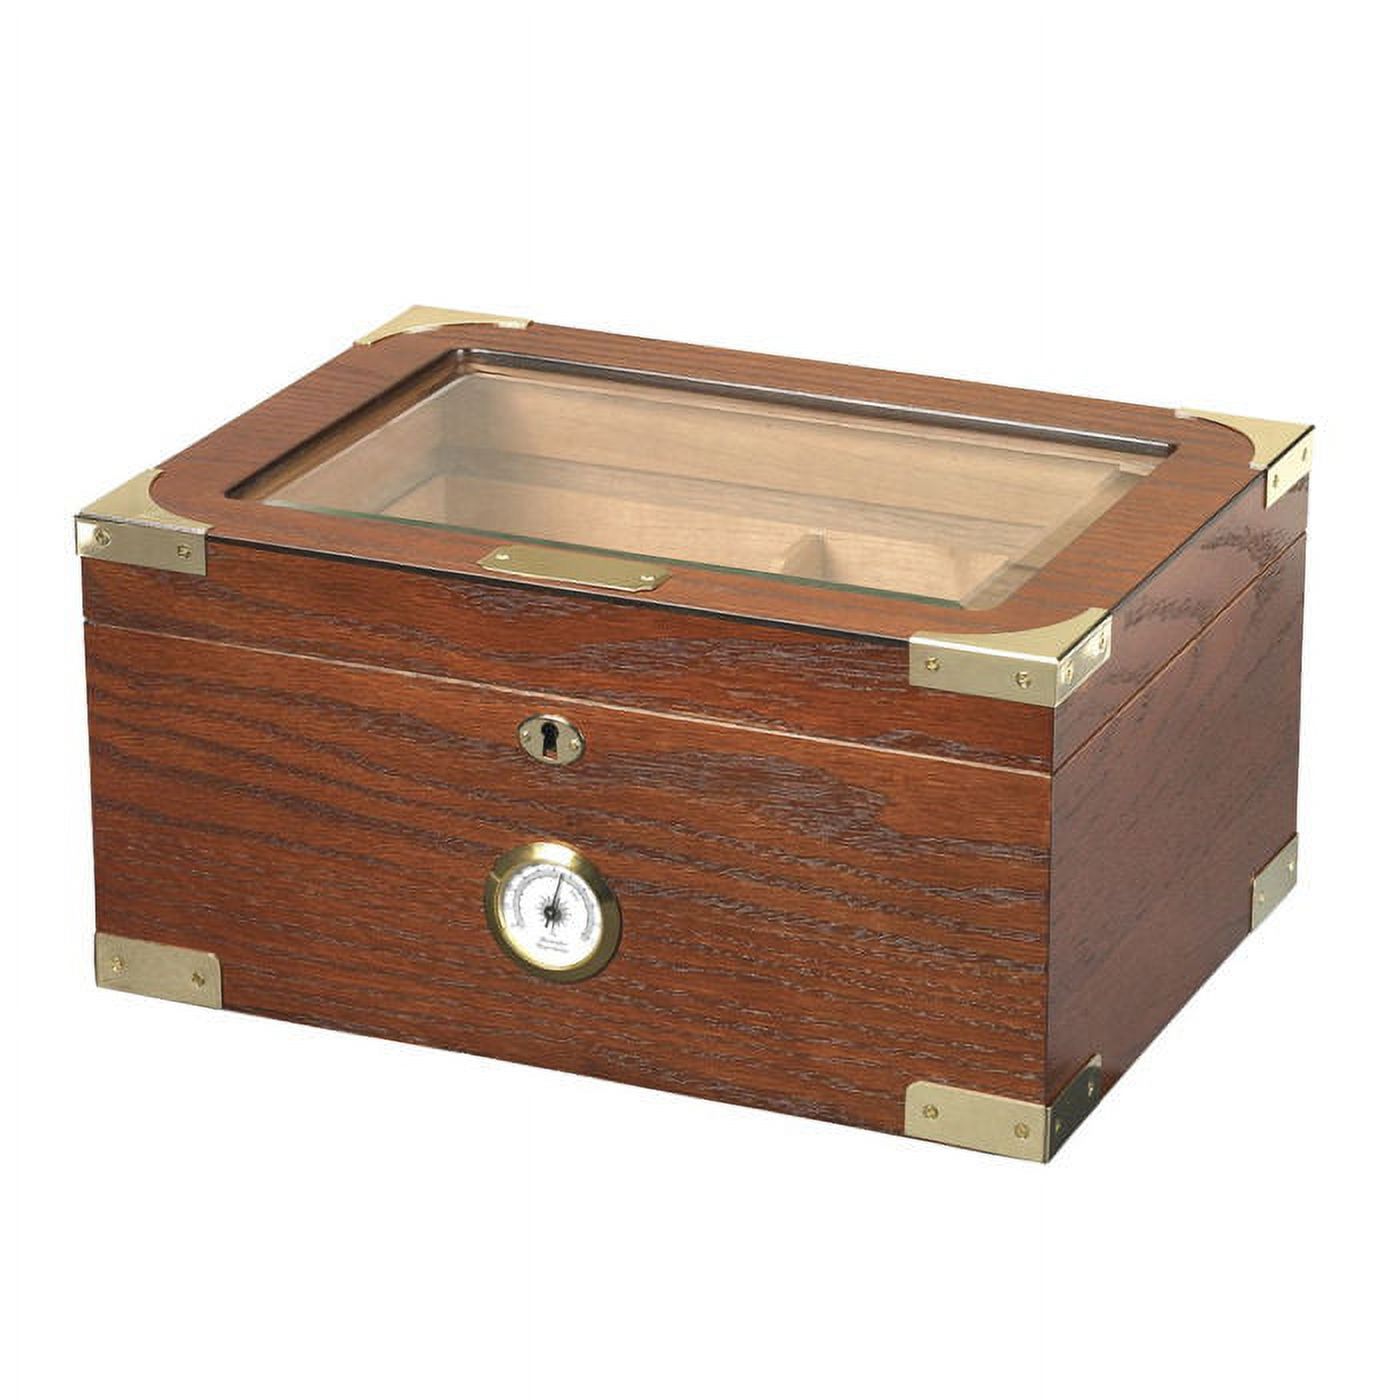 Deluxe Glass-Top Humidor (20-50 Cigars) - image 3 of 3